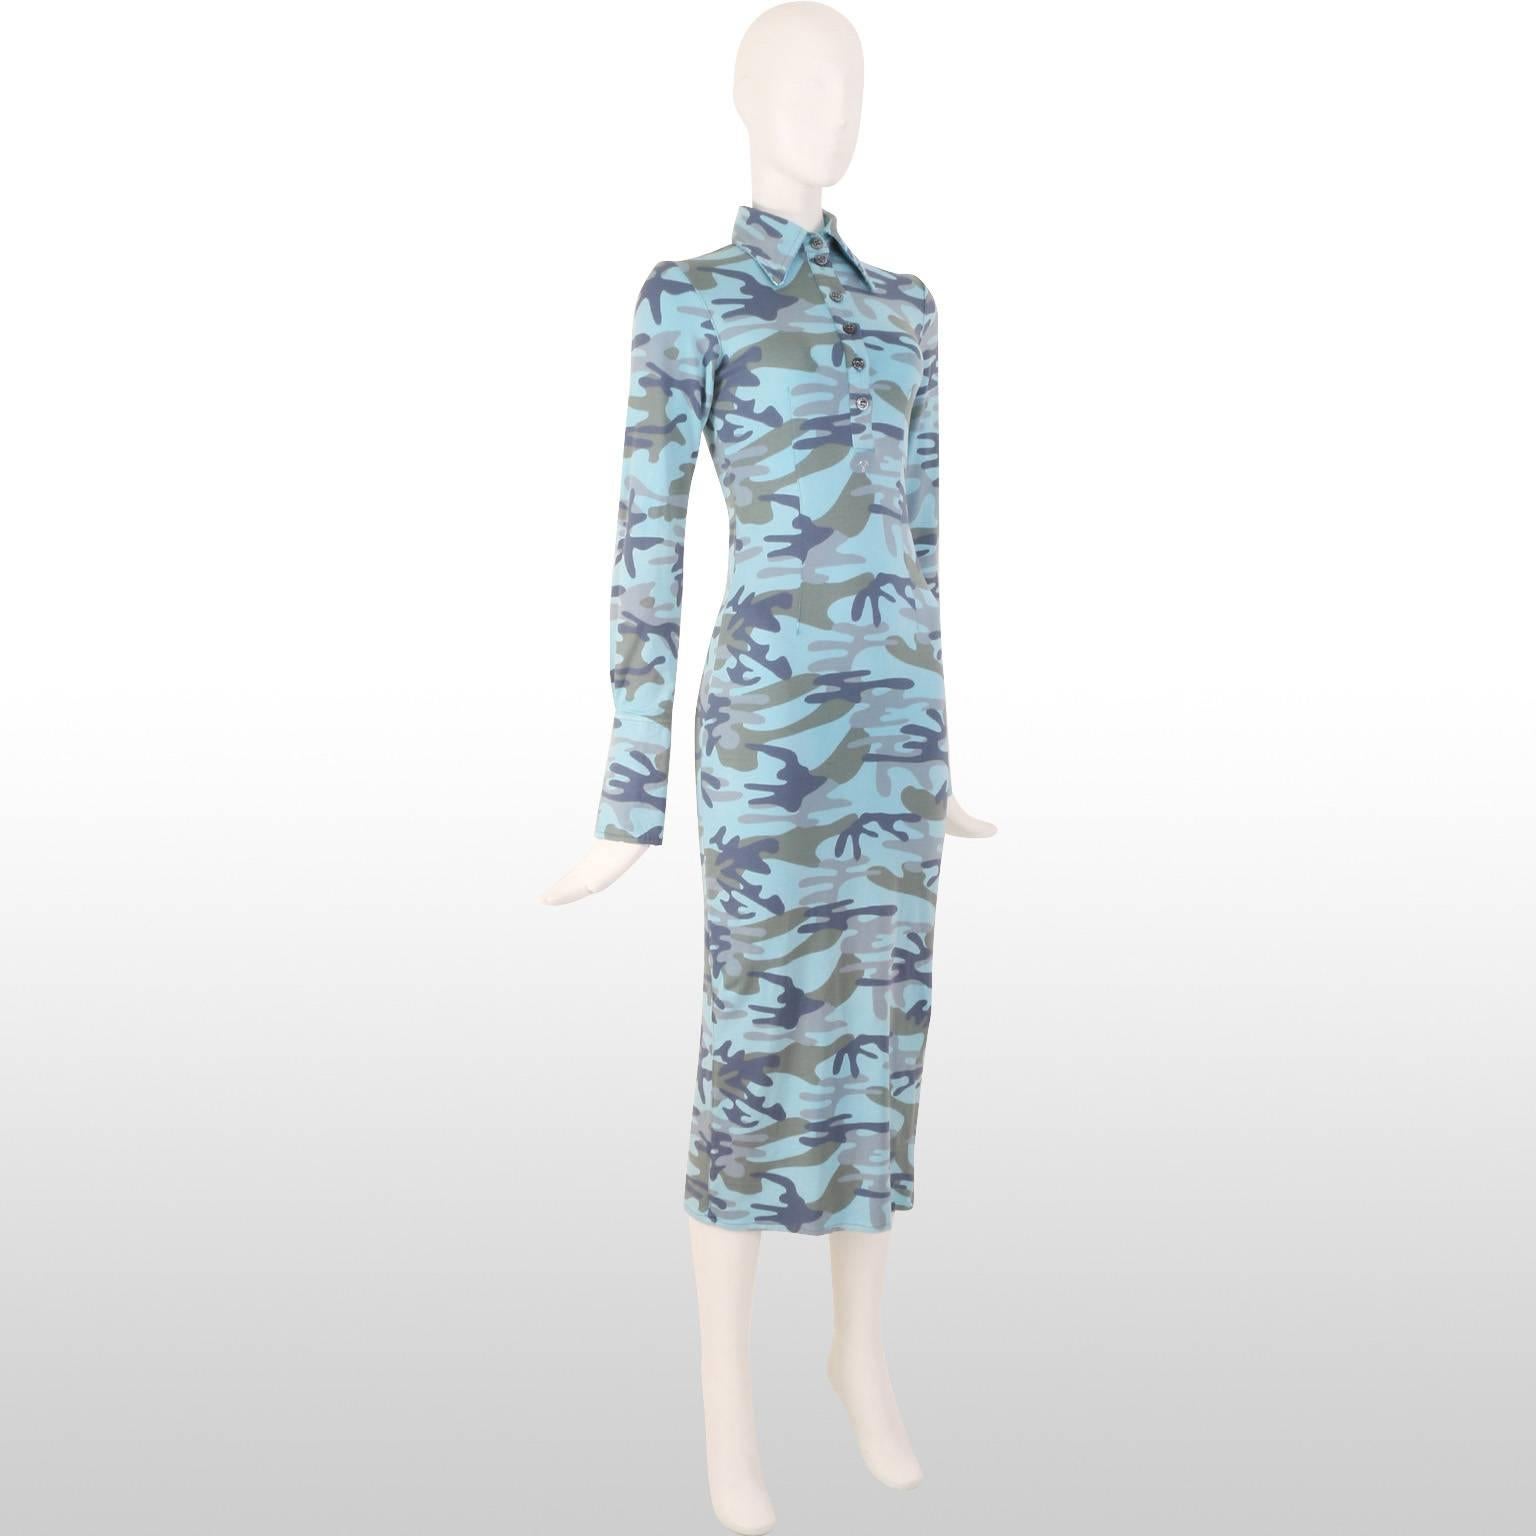 Funky blue camouflage shirt dress by Voyage featuring a bold pointed collar with a beaded edge, buttons that partially run down the front of the garment and a diamante 'v' under the bust. The stretchy fabric makes this a comfortable piece to wear,